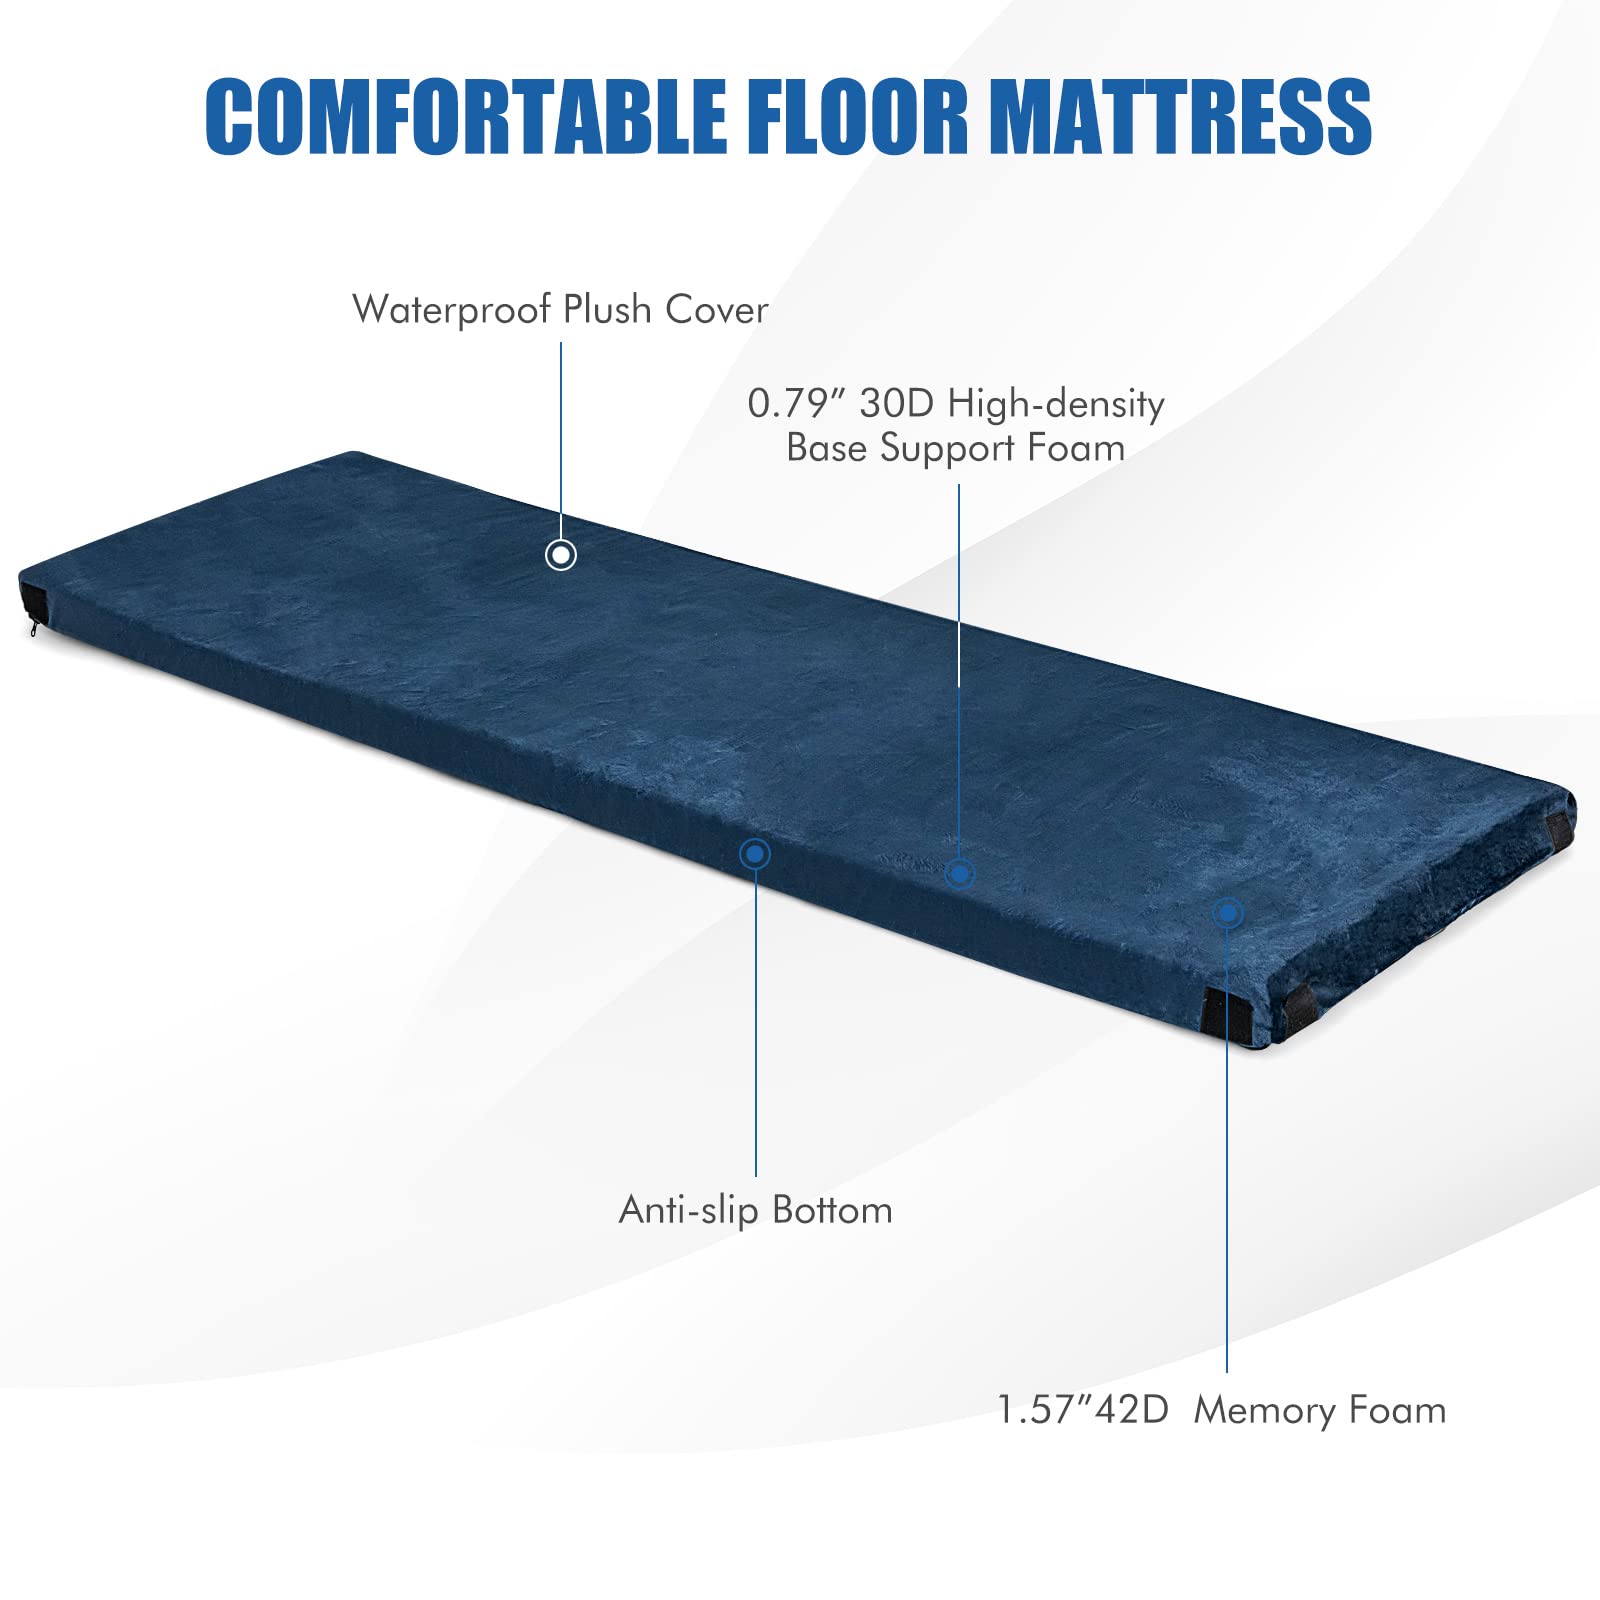 Giantex 72" Memory Foam Camping Mattress, Foldable Floor Guest Bed for Sleepover